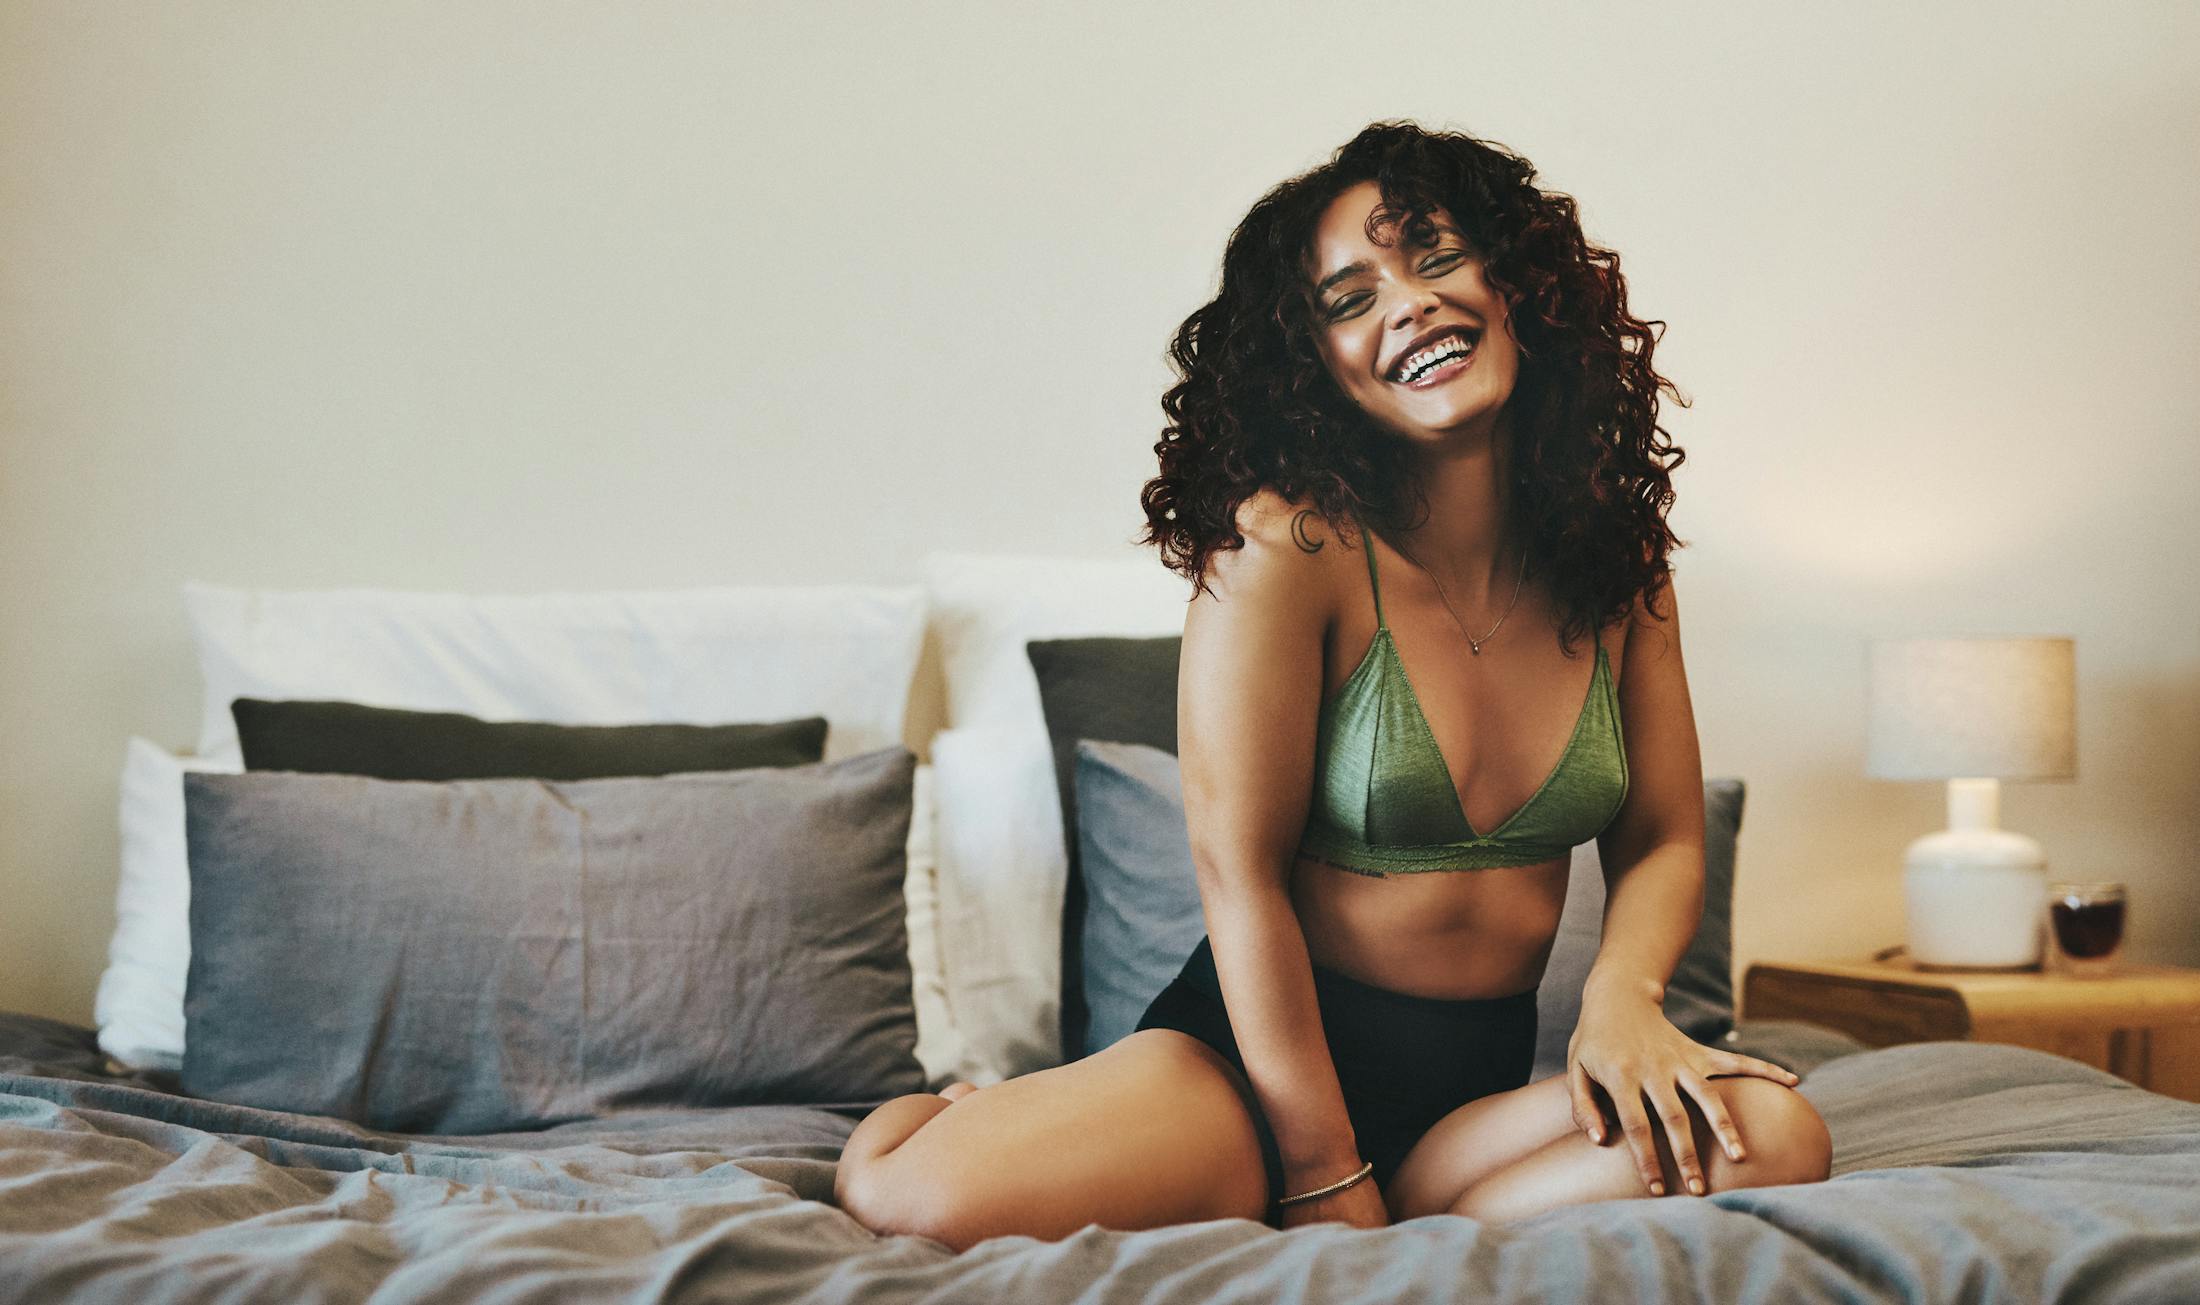 Woman with curly hair laughing while sitting in bed in her underwear